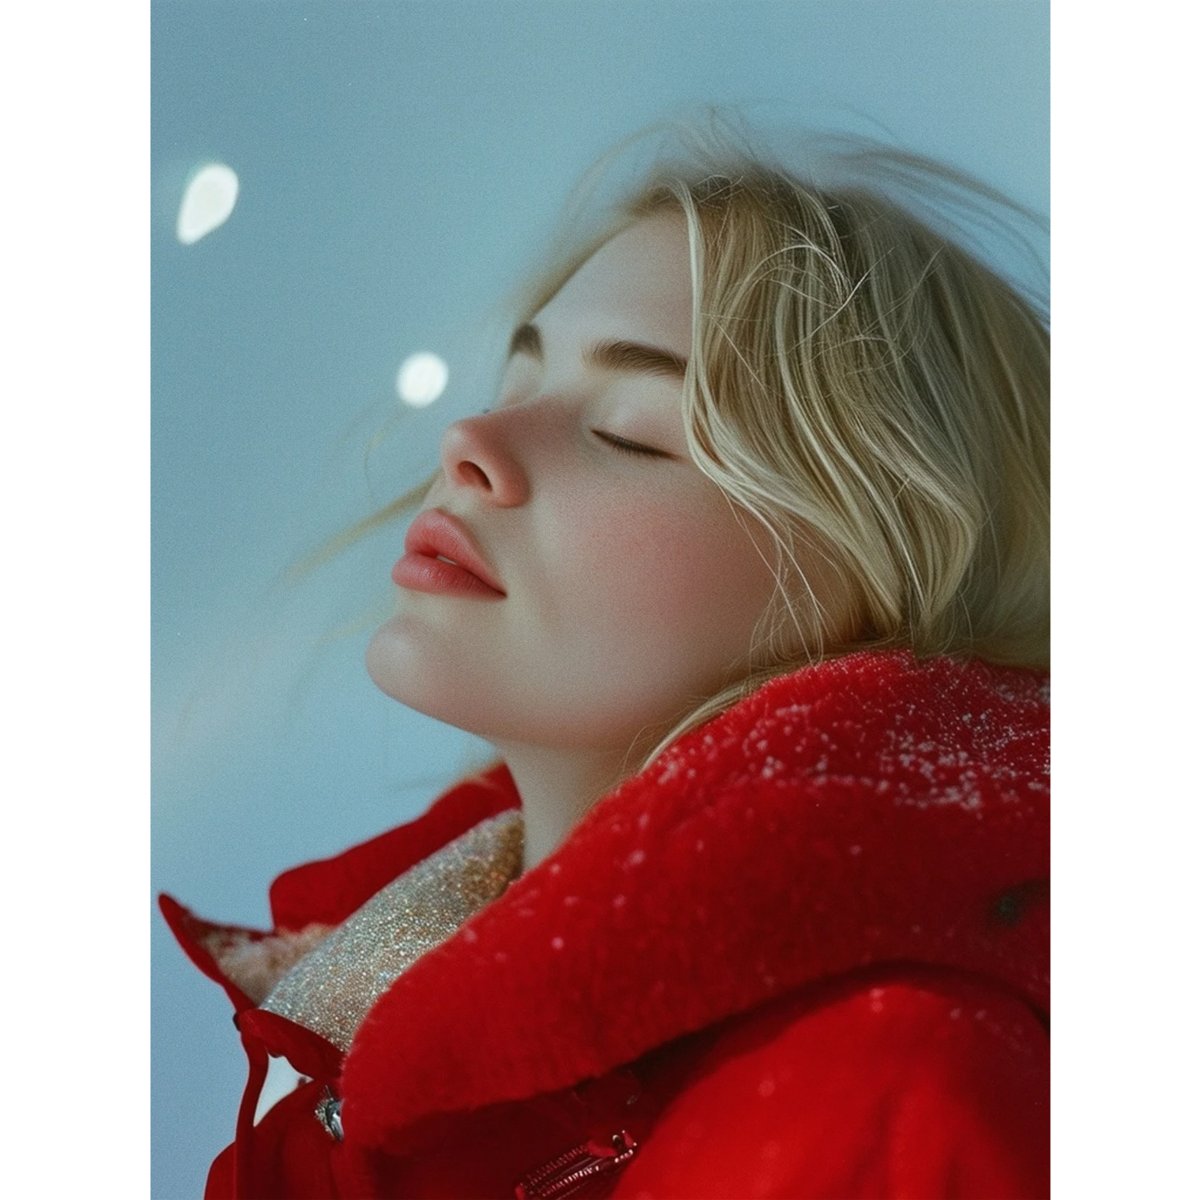 A romantic 35mm film portrait of a young woman with flowing blonde hair, wearing a vibrant red jacket. Her eyes closed, conveying longing and beauty, in my signature style.

Created using @stylar_ai's #StableDiffusion 3. What do you think of the result, #StylarAI?